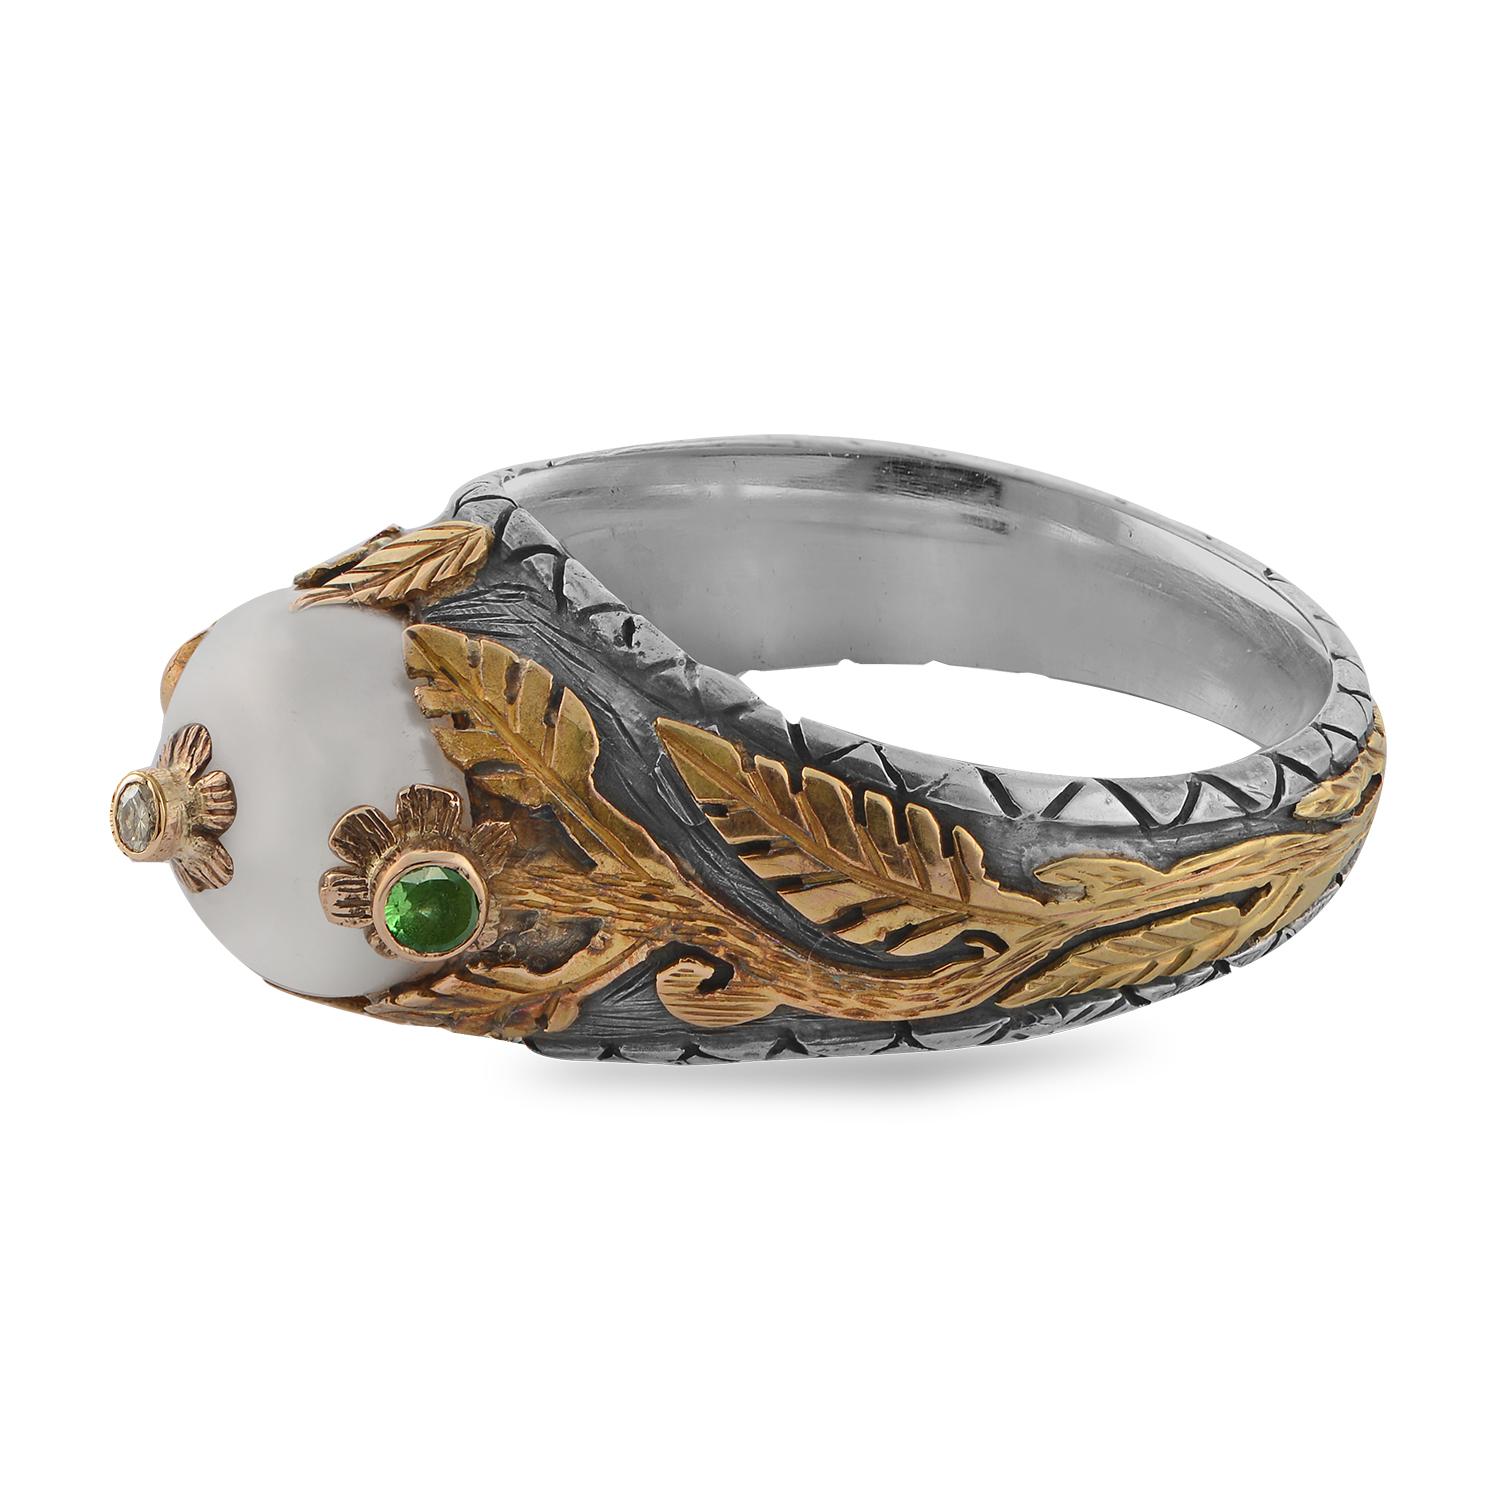 This exquisite one of a kind Emma Chapman Pearl Diamond Tsavorite 18kt Gold Ring, has been handmade in our workshops. It features a  central pearl which is embedded with a full cut diamond set in an 18kt gold flower. The pearl is flanked by two